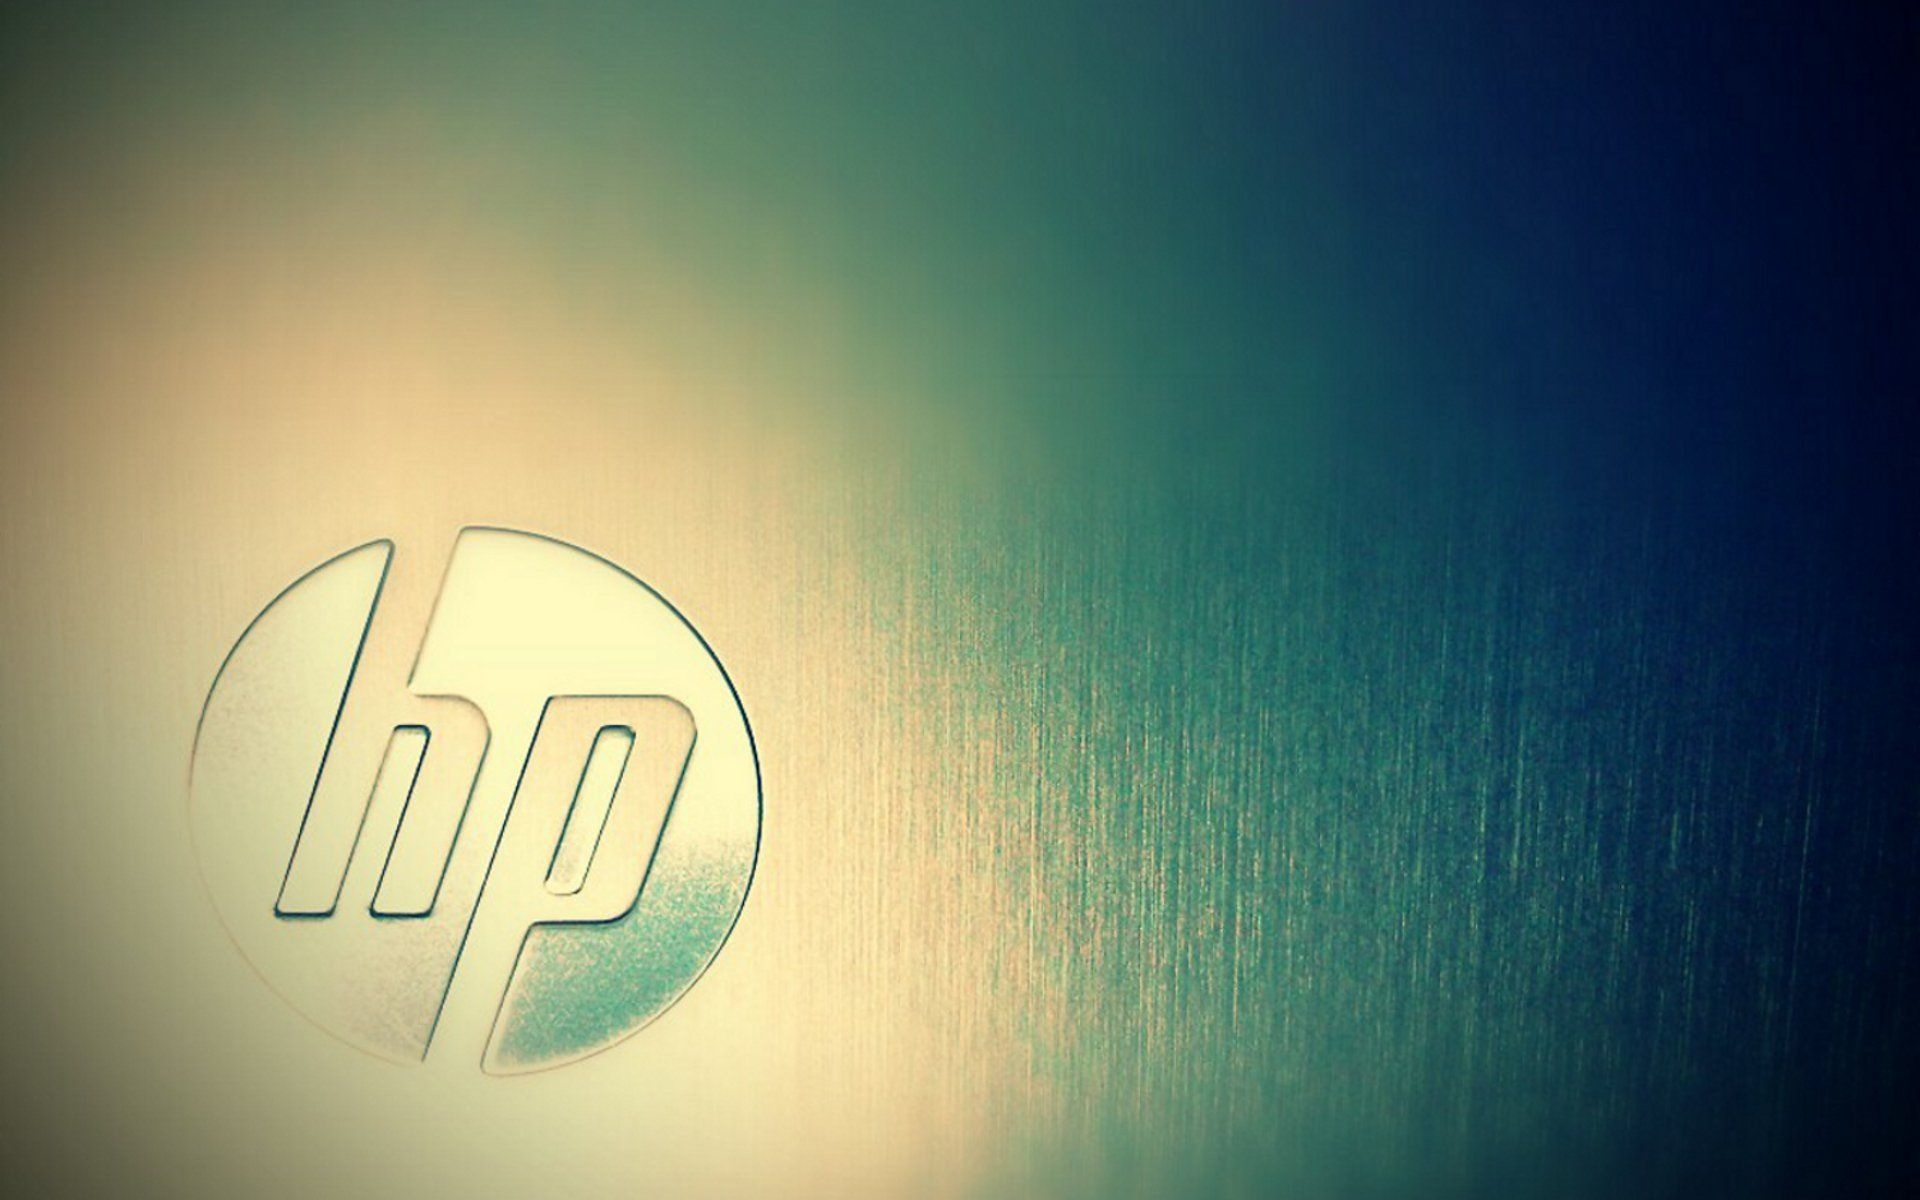 HP, HPE wallpapers, Top HPE backgrounds, selection, 1920x1200 HD Desktop